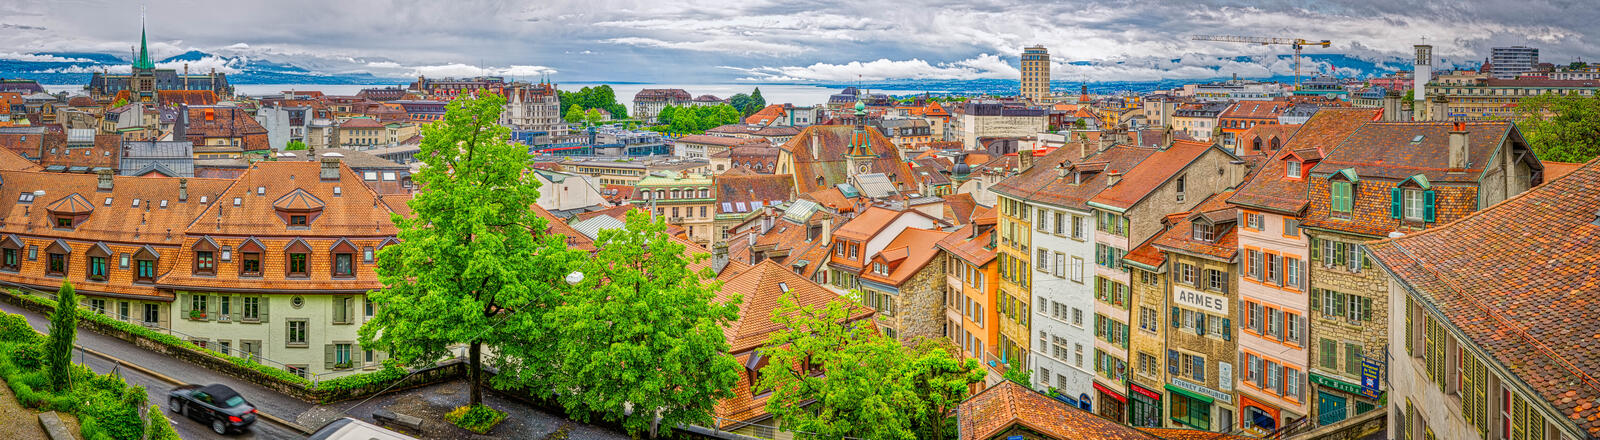 Wallpapers Old Town Lausanne Switzerland on the desktop